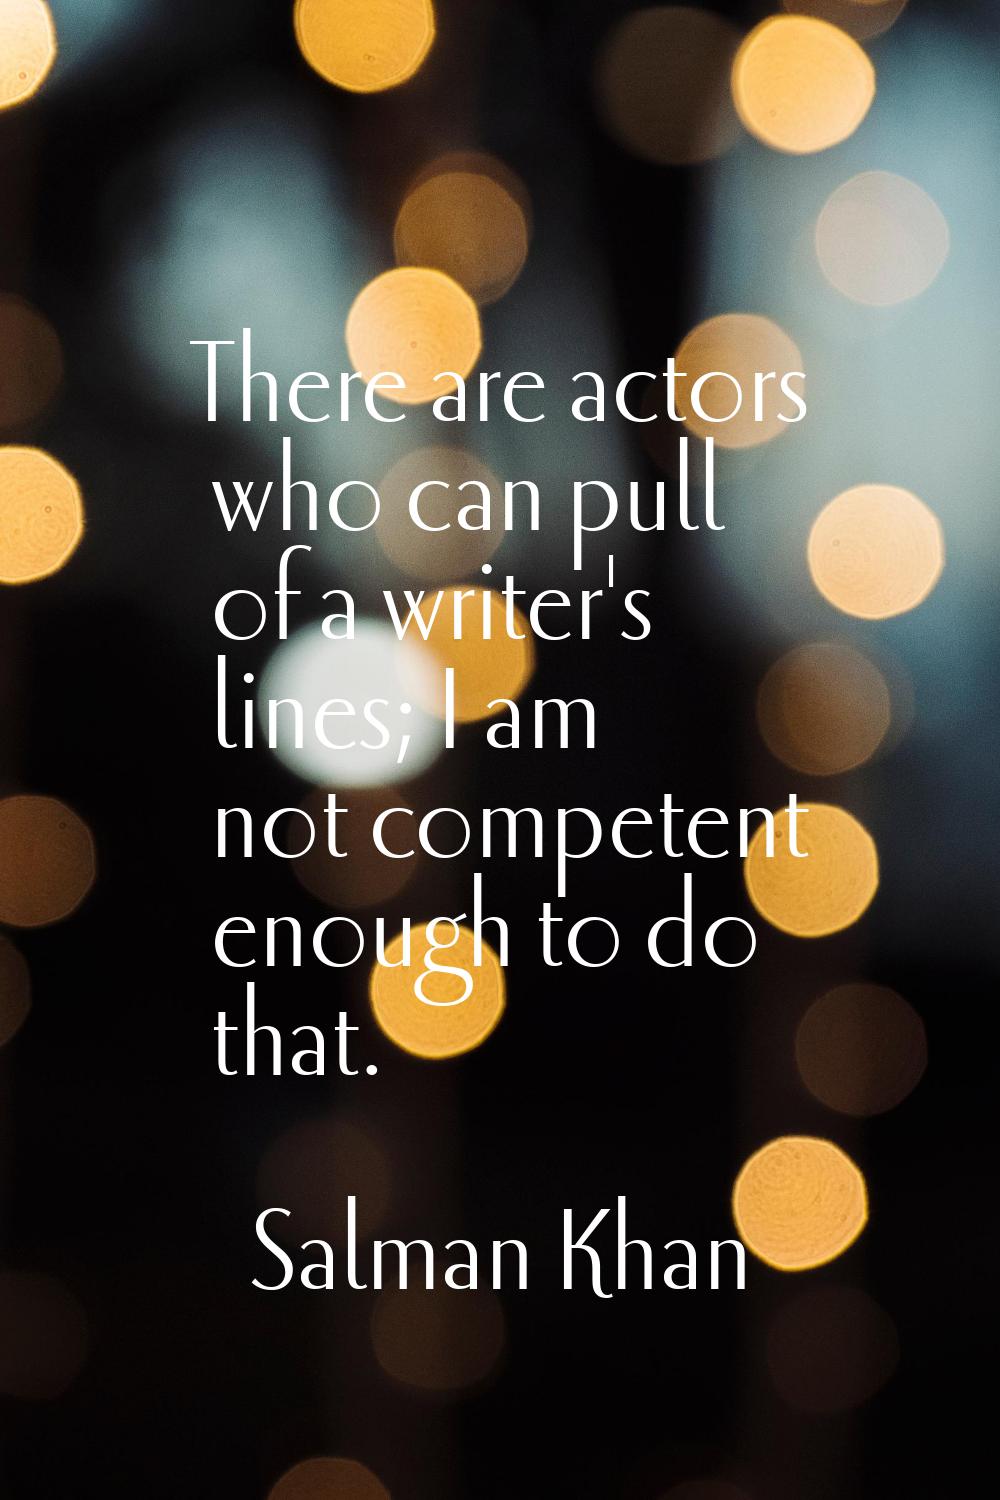 There are actors who can pull of a writer's lines; I am not competent enough to do that.